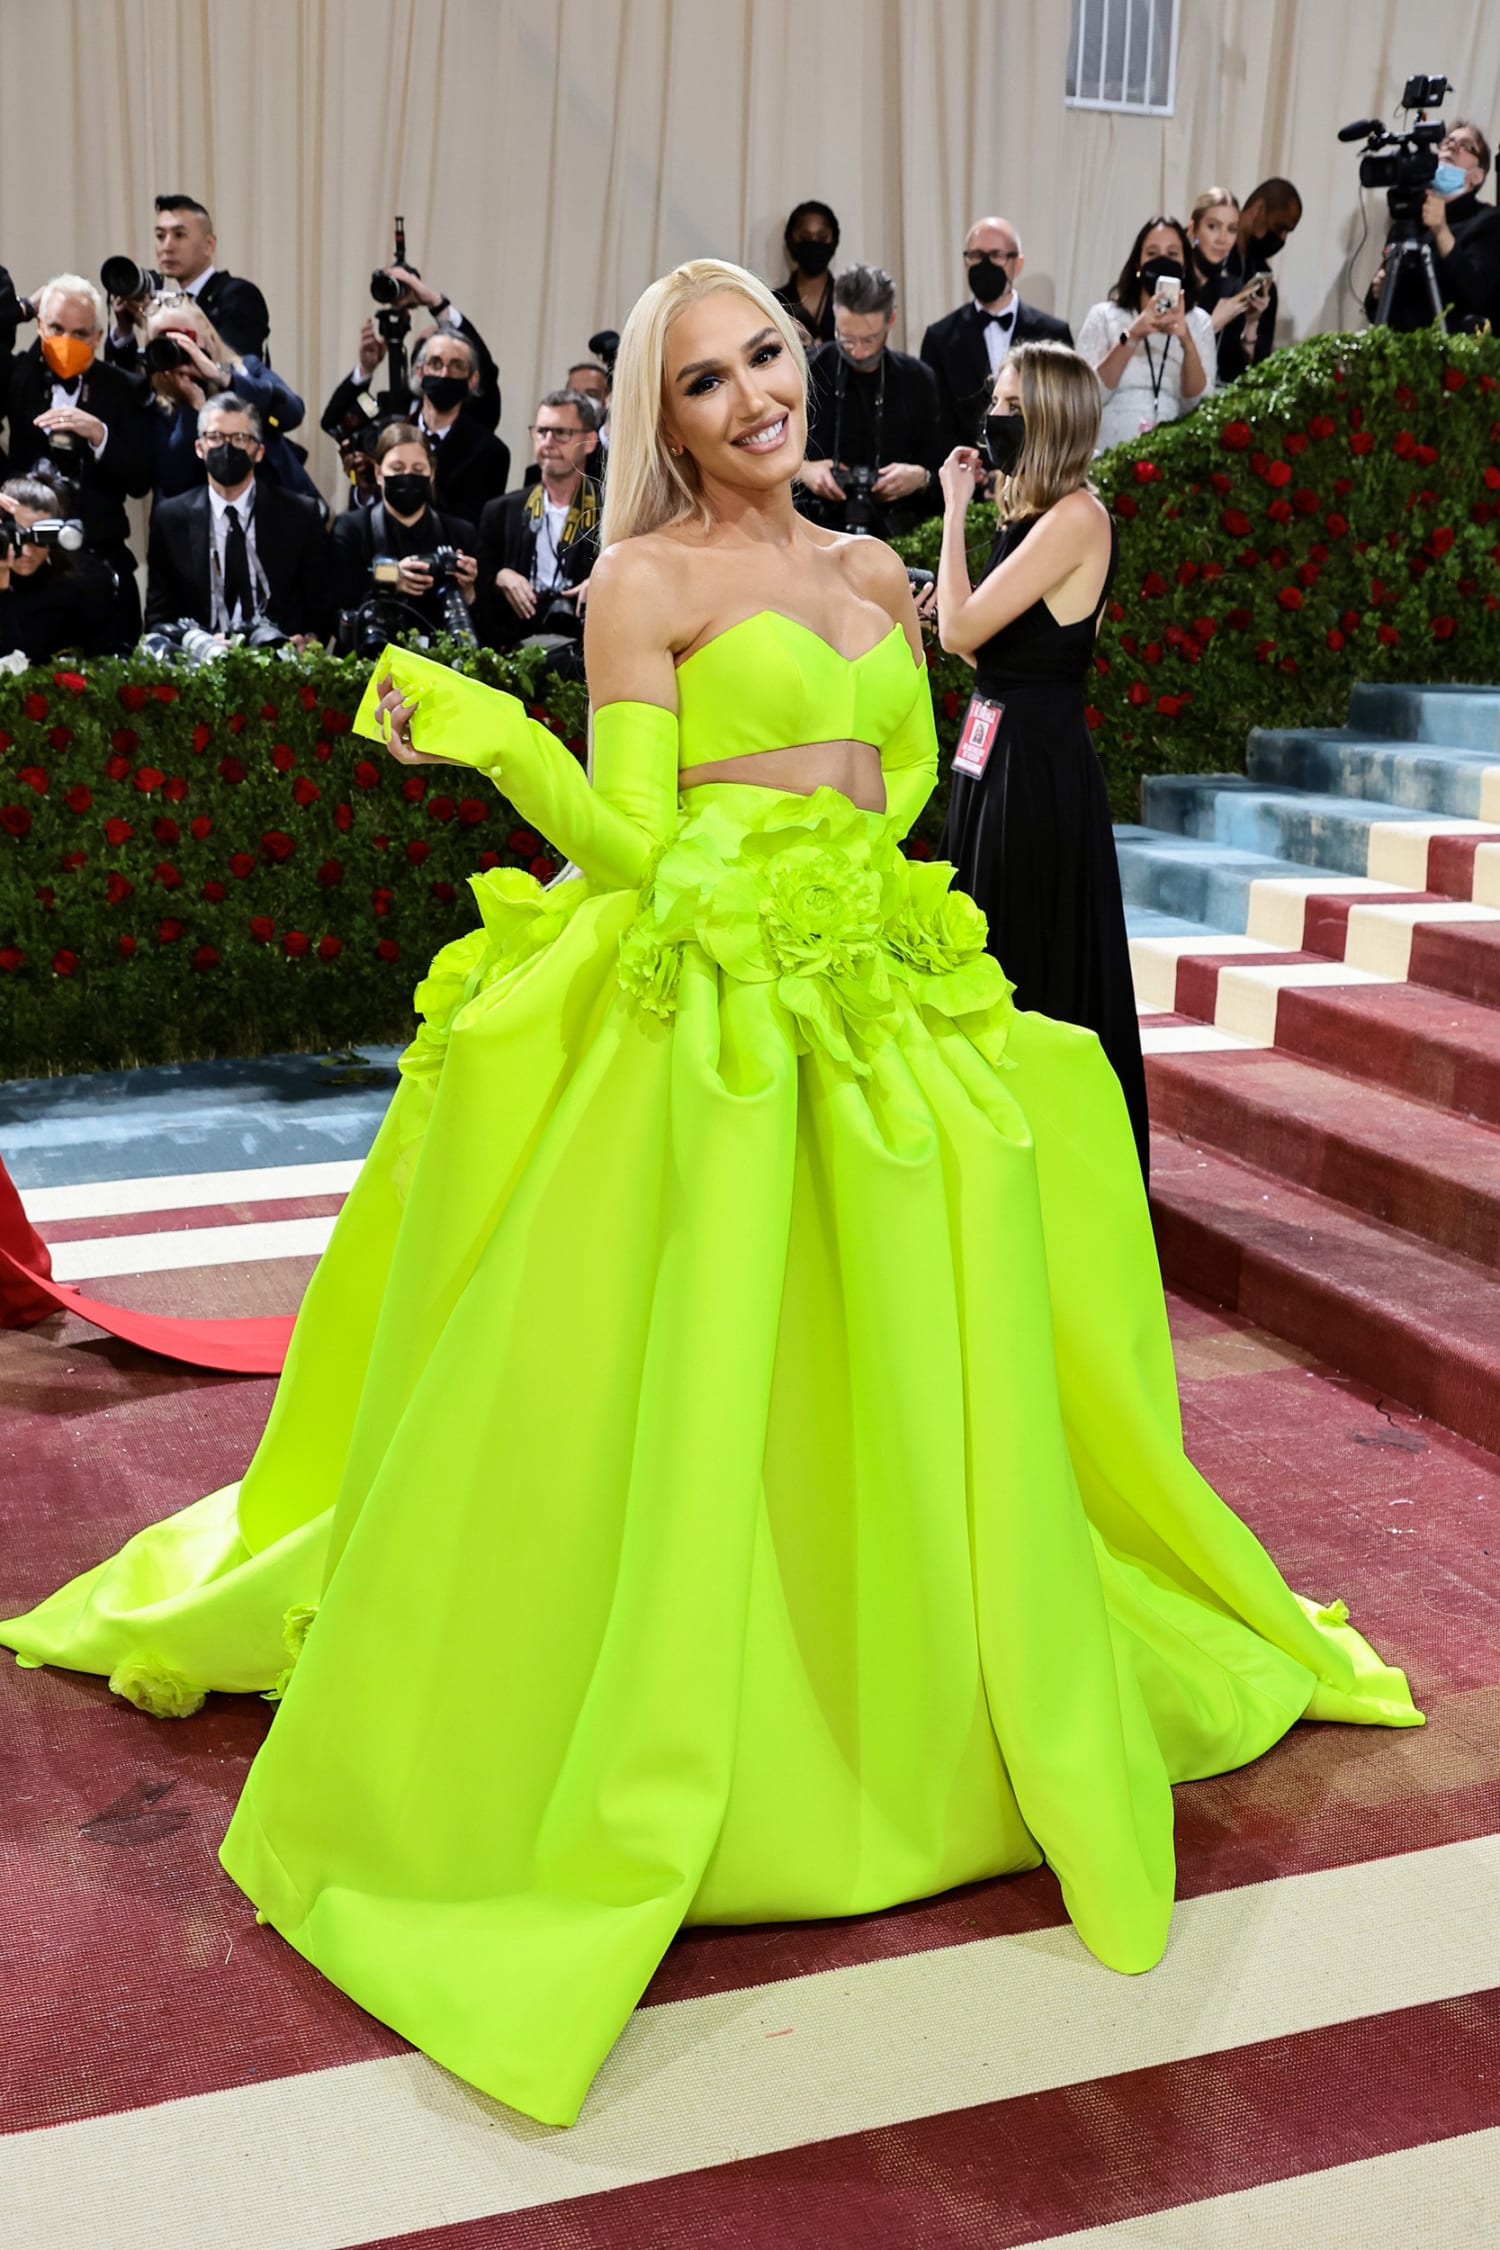 THE MOST EYE-CATCHING LOOKS OF THE 2022 MET GALA - The Vault